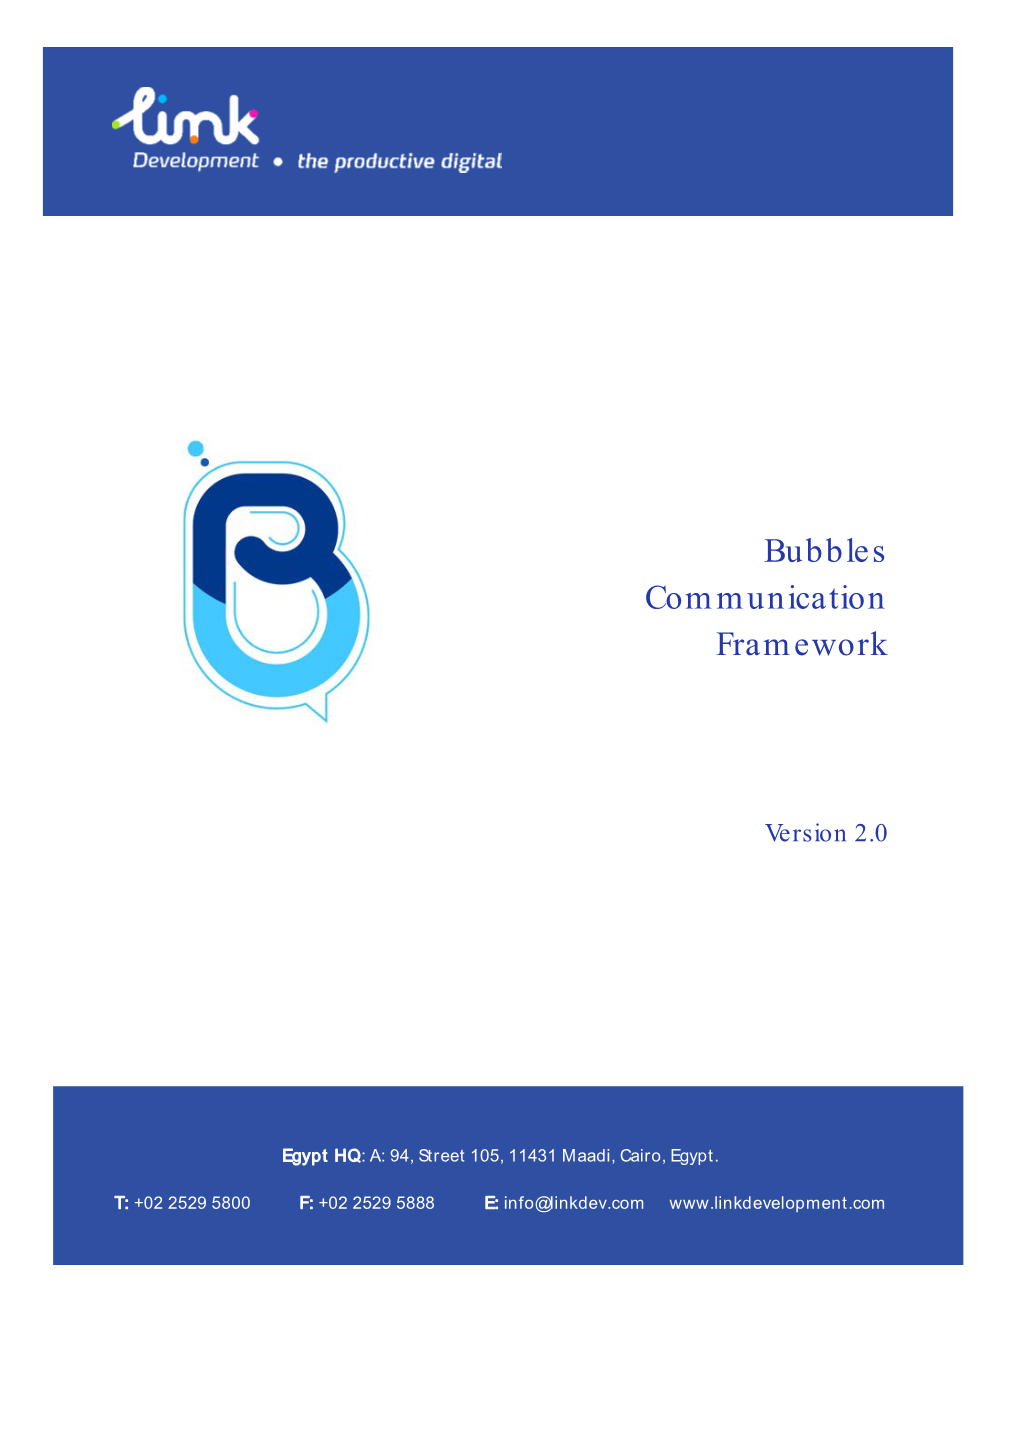 Bubbles Communication Framework Is Unsurpassed Chatting Solution Including Both Bubbles Chat and Chat Bot